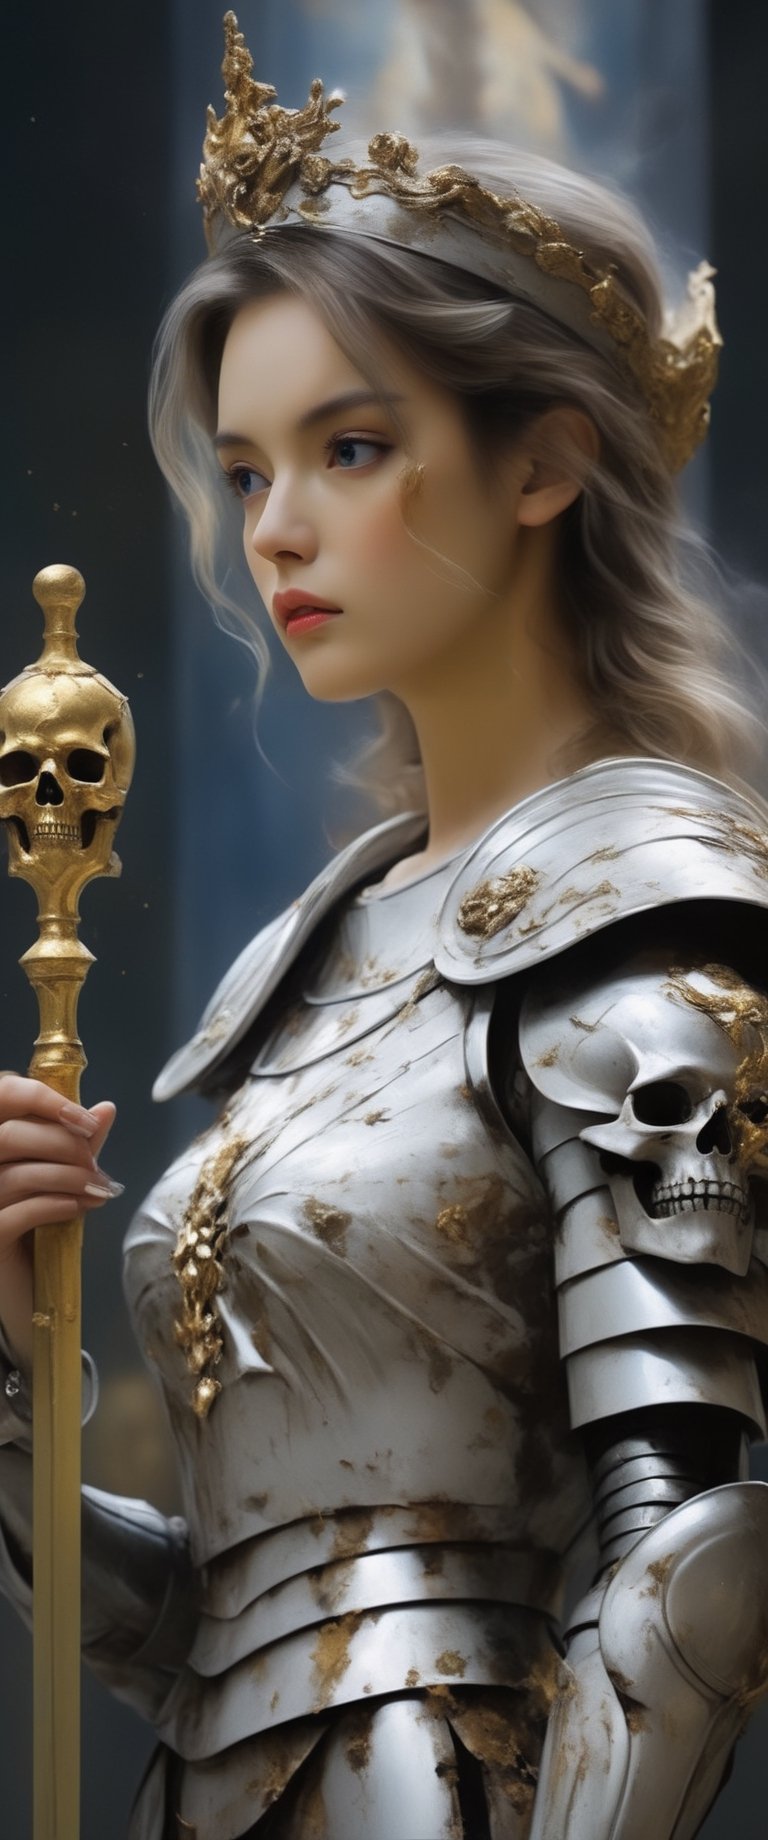 breathtaking ethereal RAW photo of female ((athena, god with a scepter in from of an altar, golden armor

 )), dark and moody style, perfect face, outstretched perfect hands . masterpiece, professional, award-winning, intricate details, ultra high detailed, 64k, dramatic light, volumetric light, dynamic lighting, Epic, splash art .. ), by james jean $, roby dwi antono $, ross tran $. francis bacon $, michal mraz $, adrian ghenie $, petra cortright $, gerhard richter $, takato yamamoto $, ashley wood, tense atmospheric, , , , sooyaaa,IMGFIX,Comic Book-Style,Movie Aesthetic,action shot,photo r3al,bad quality image,oil painting, cinematic moviemaker style,Japan Vibes,H effect,koh_yunjung ,koh_yunjung,kwon-nara,sooyaaa,colorful,bones,skulls,armor,han-hyoju-xl
,DonMn1ghtm4reXL, ct-nijireal,Seiya Pegasus